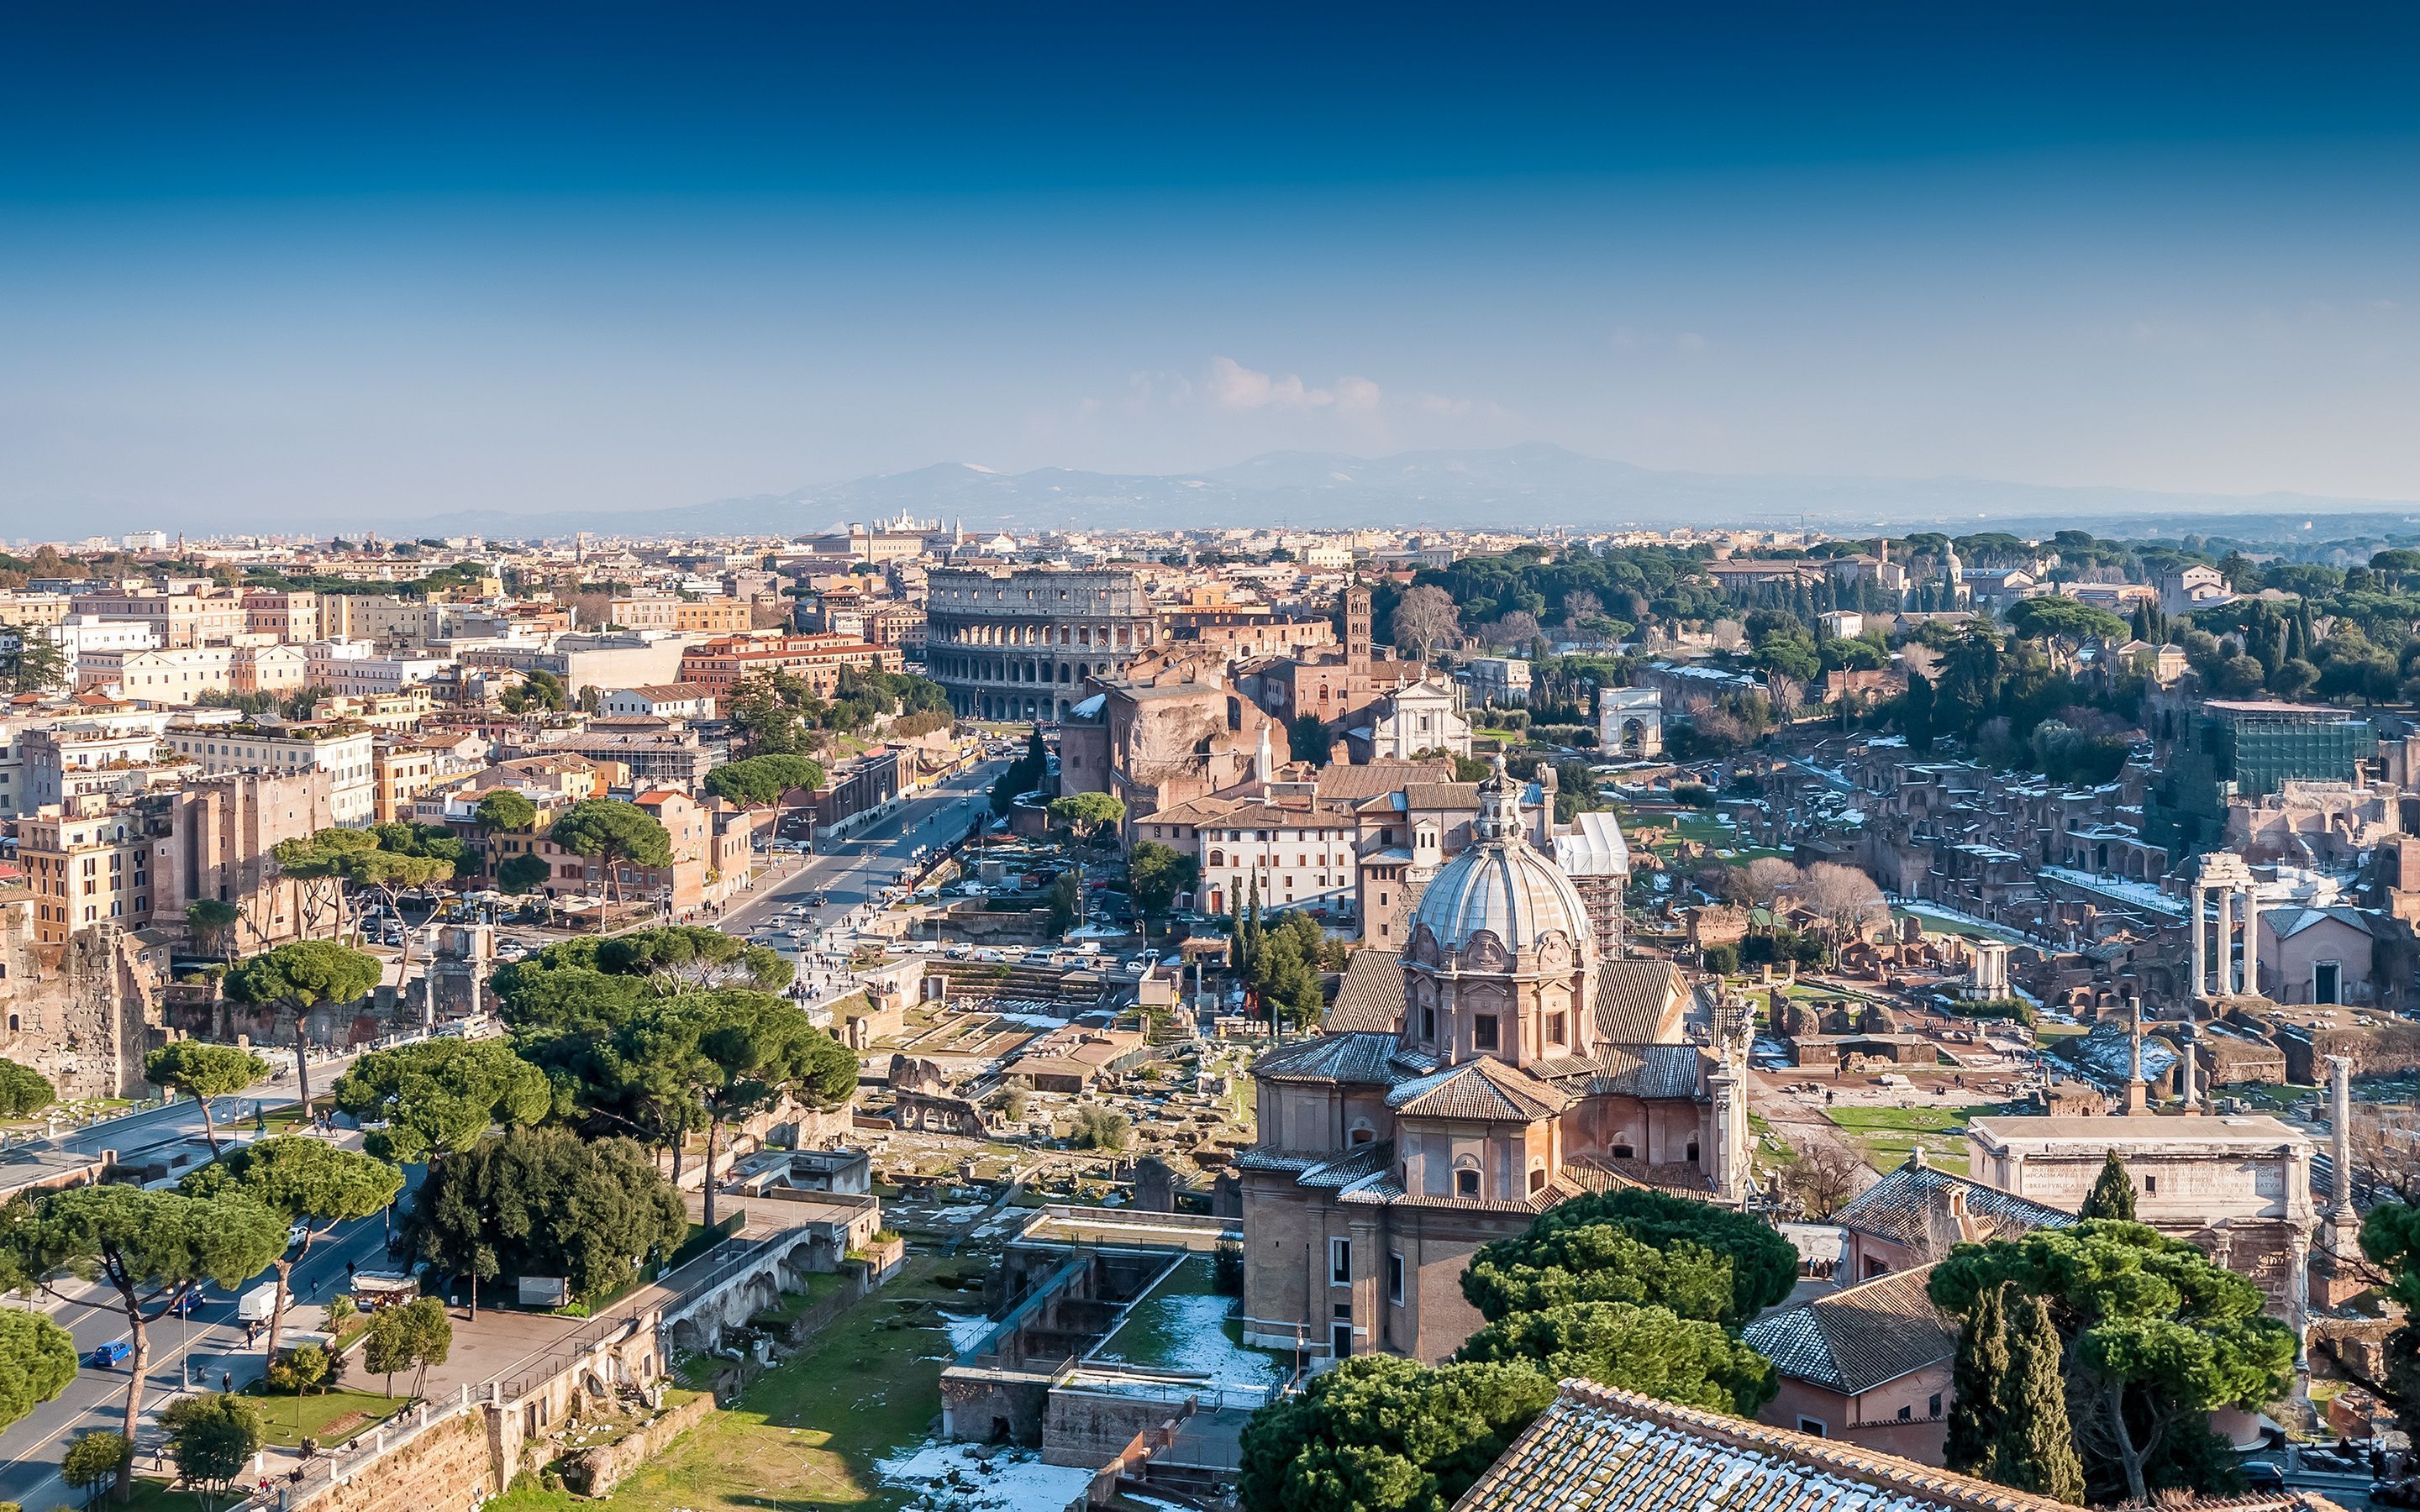 The ancient city of Rome, Italy wallpaper and image